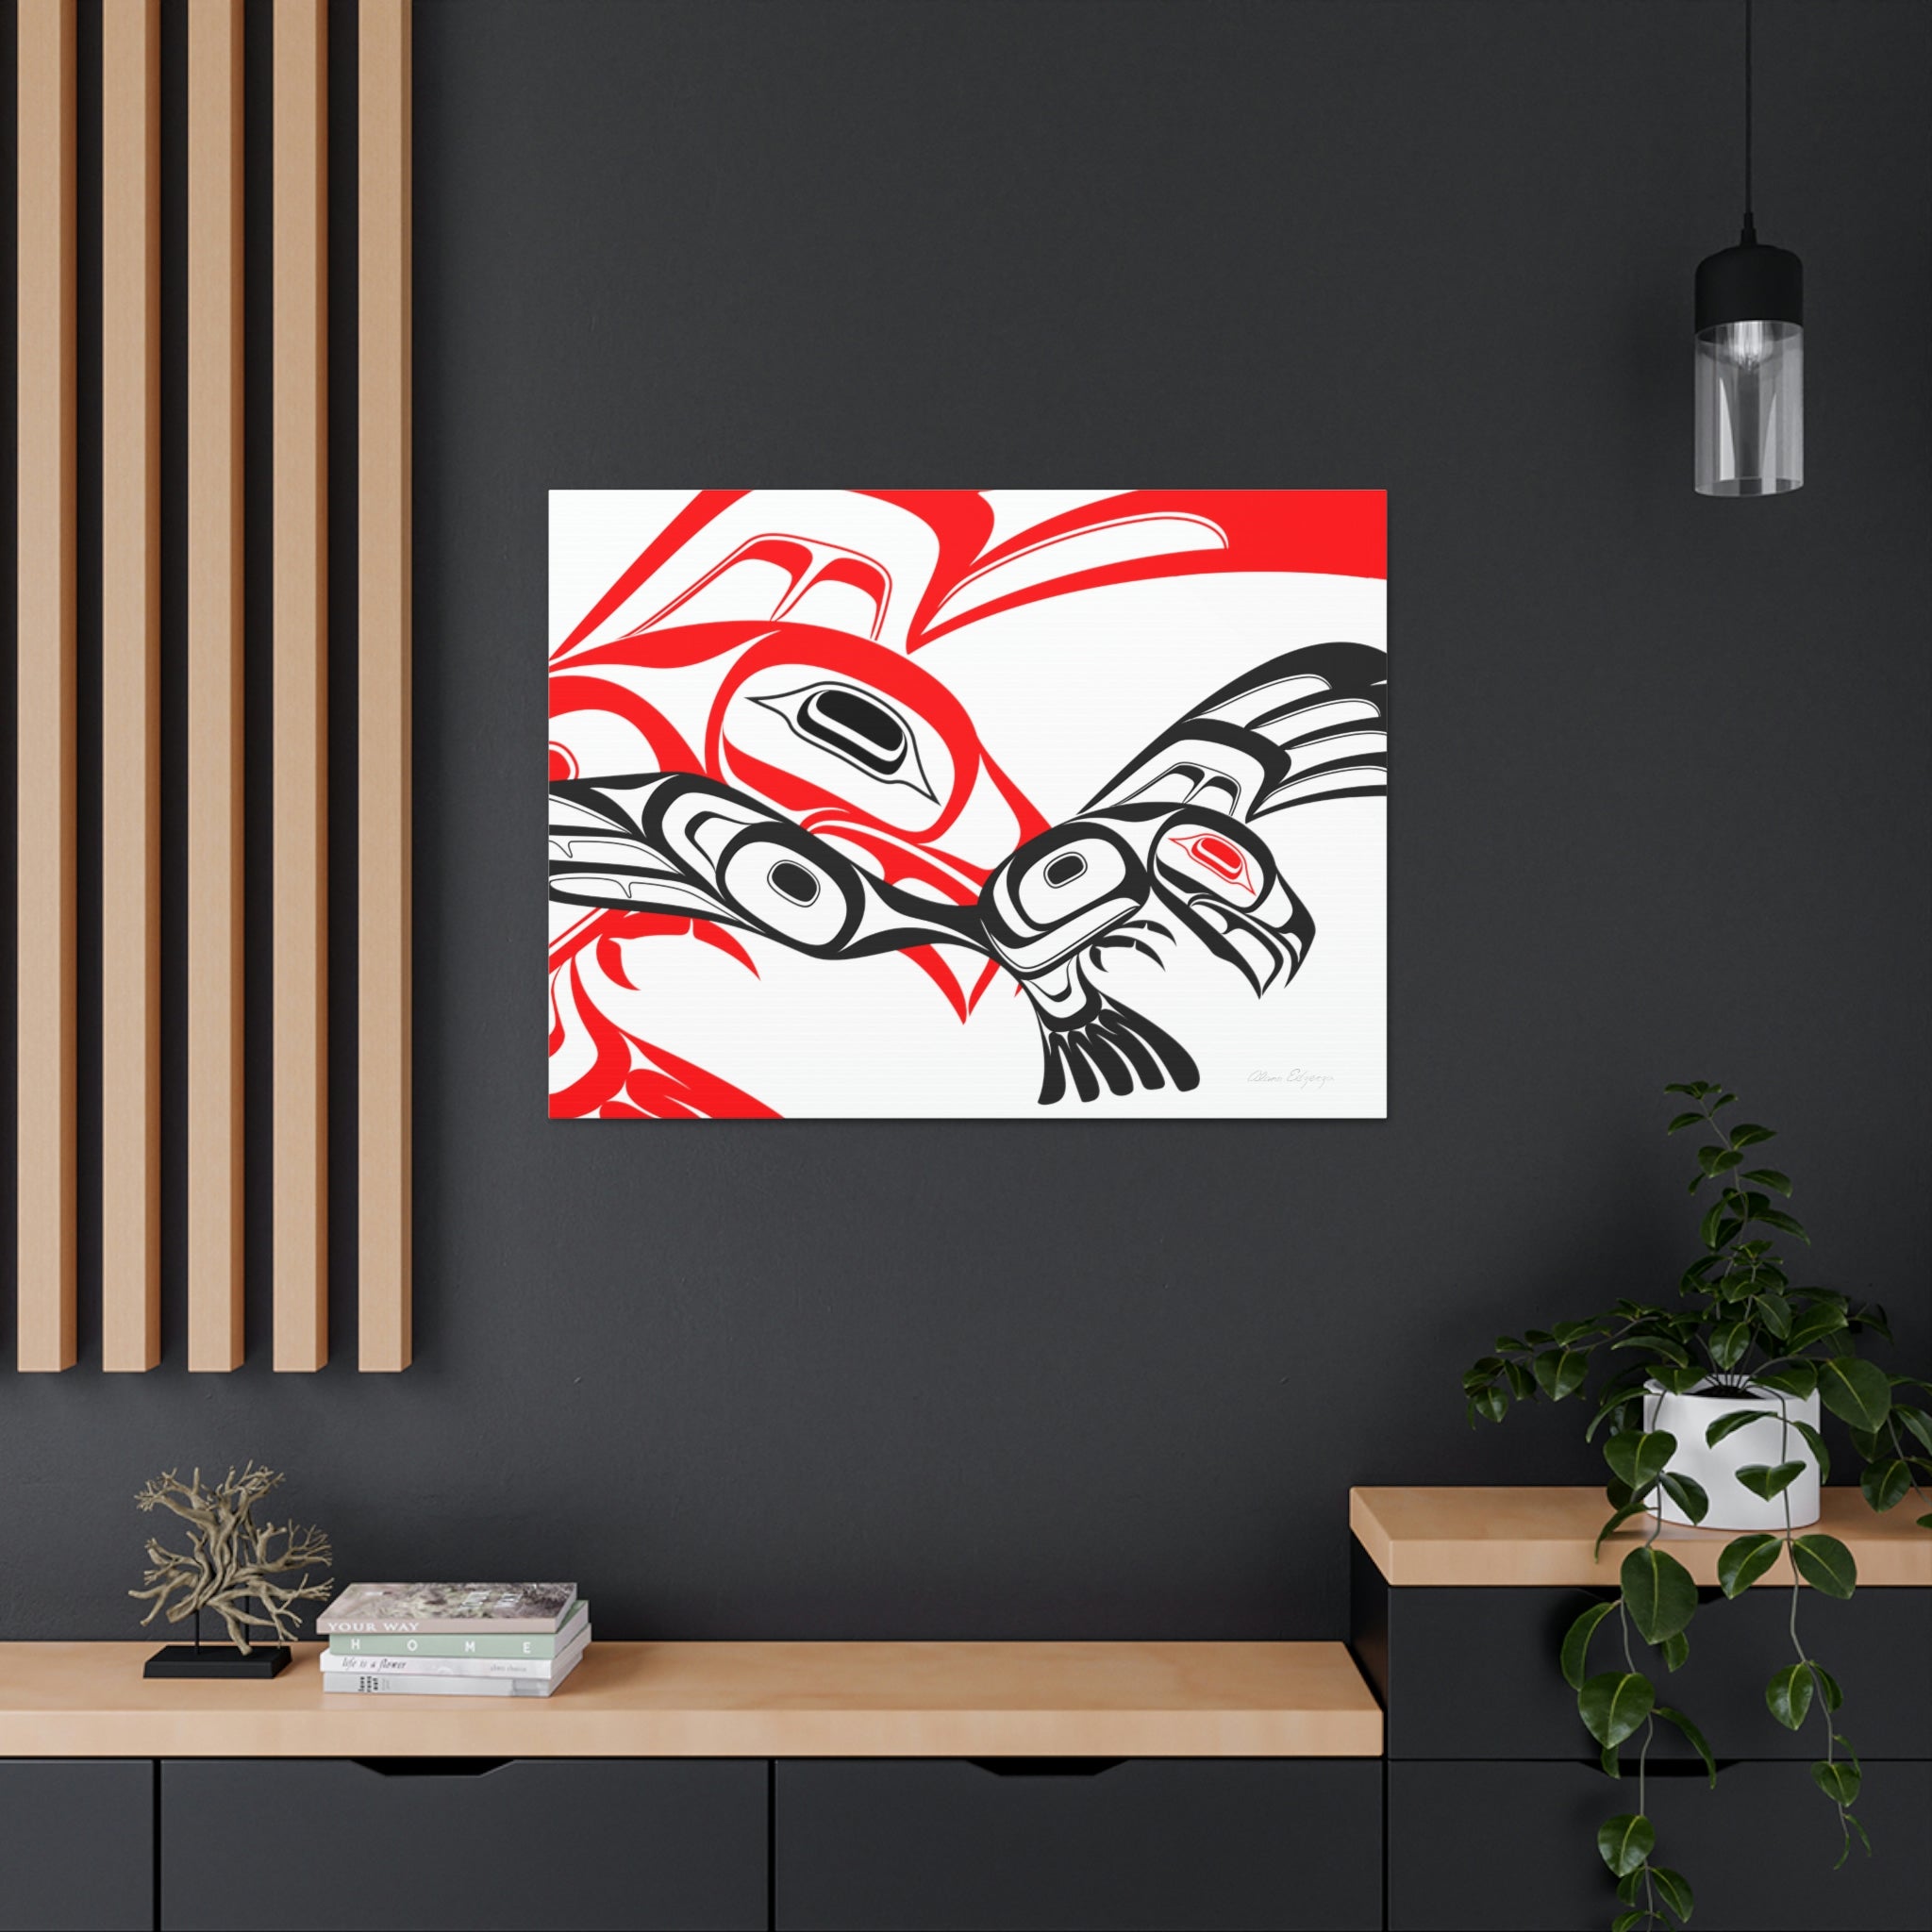 Red and Black Eagle Striking on Canvas 2023